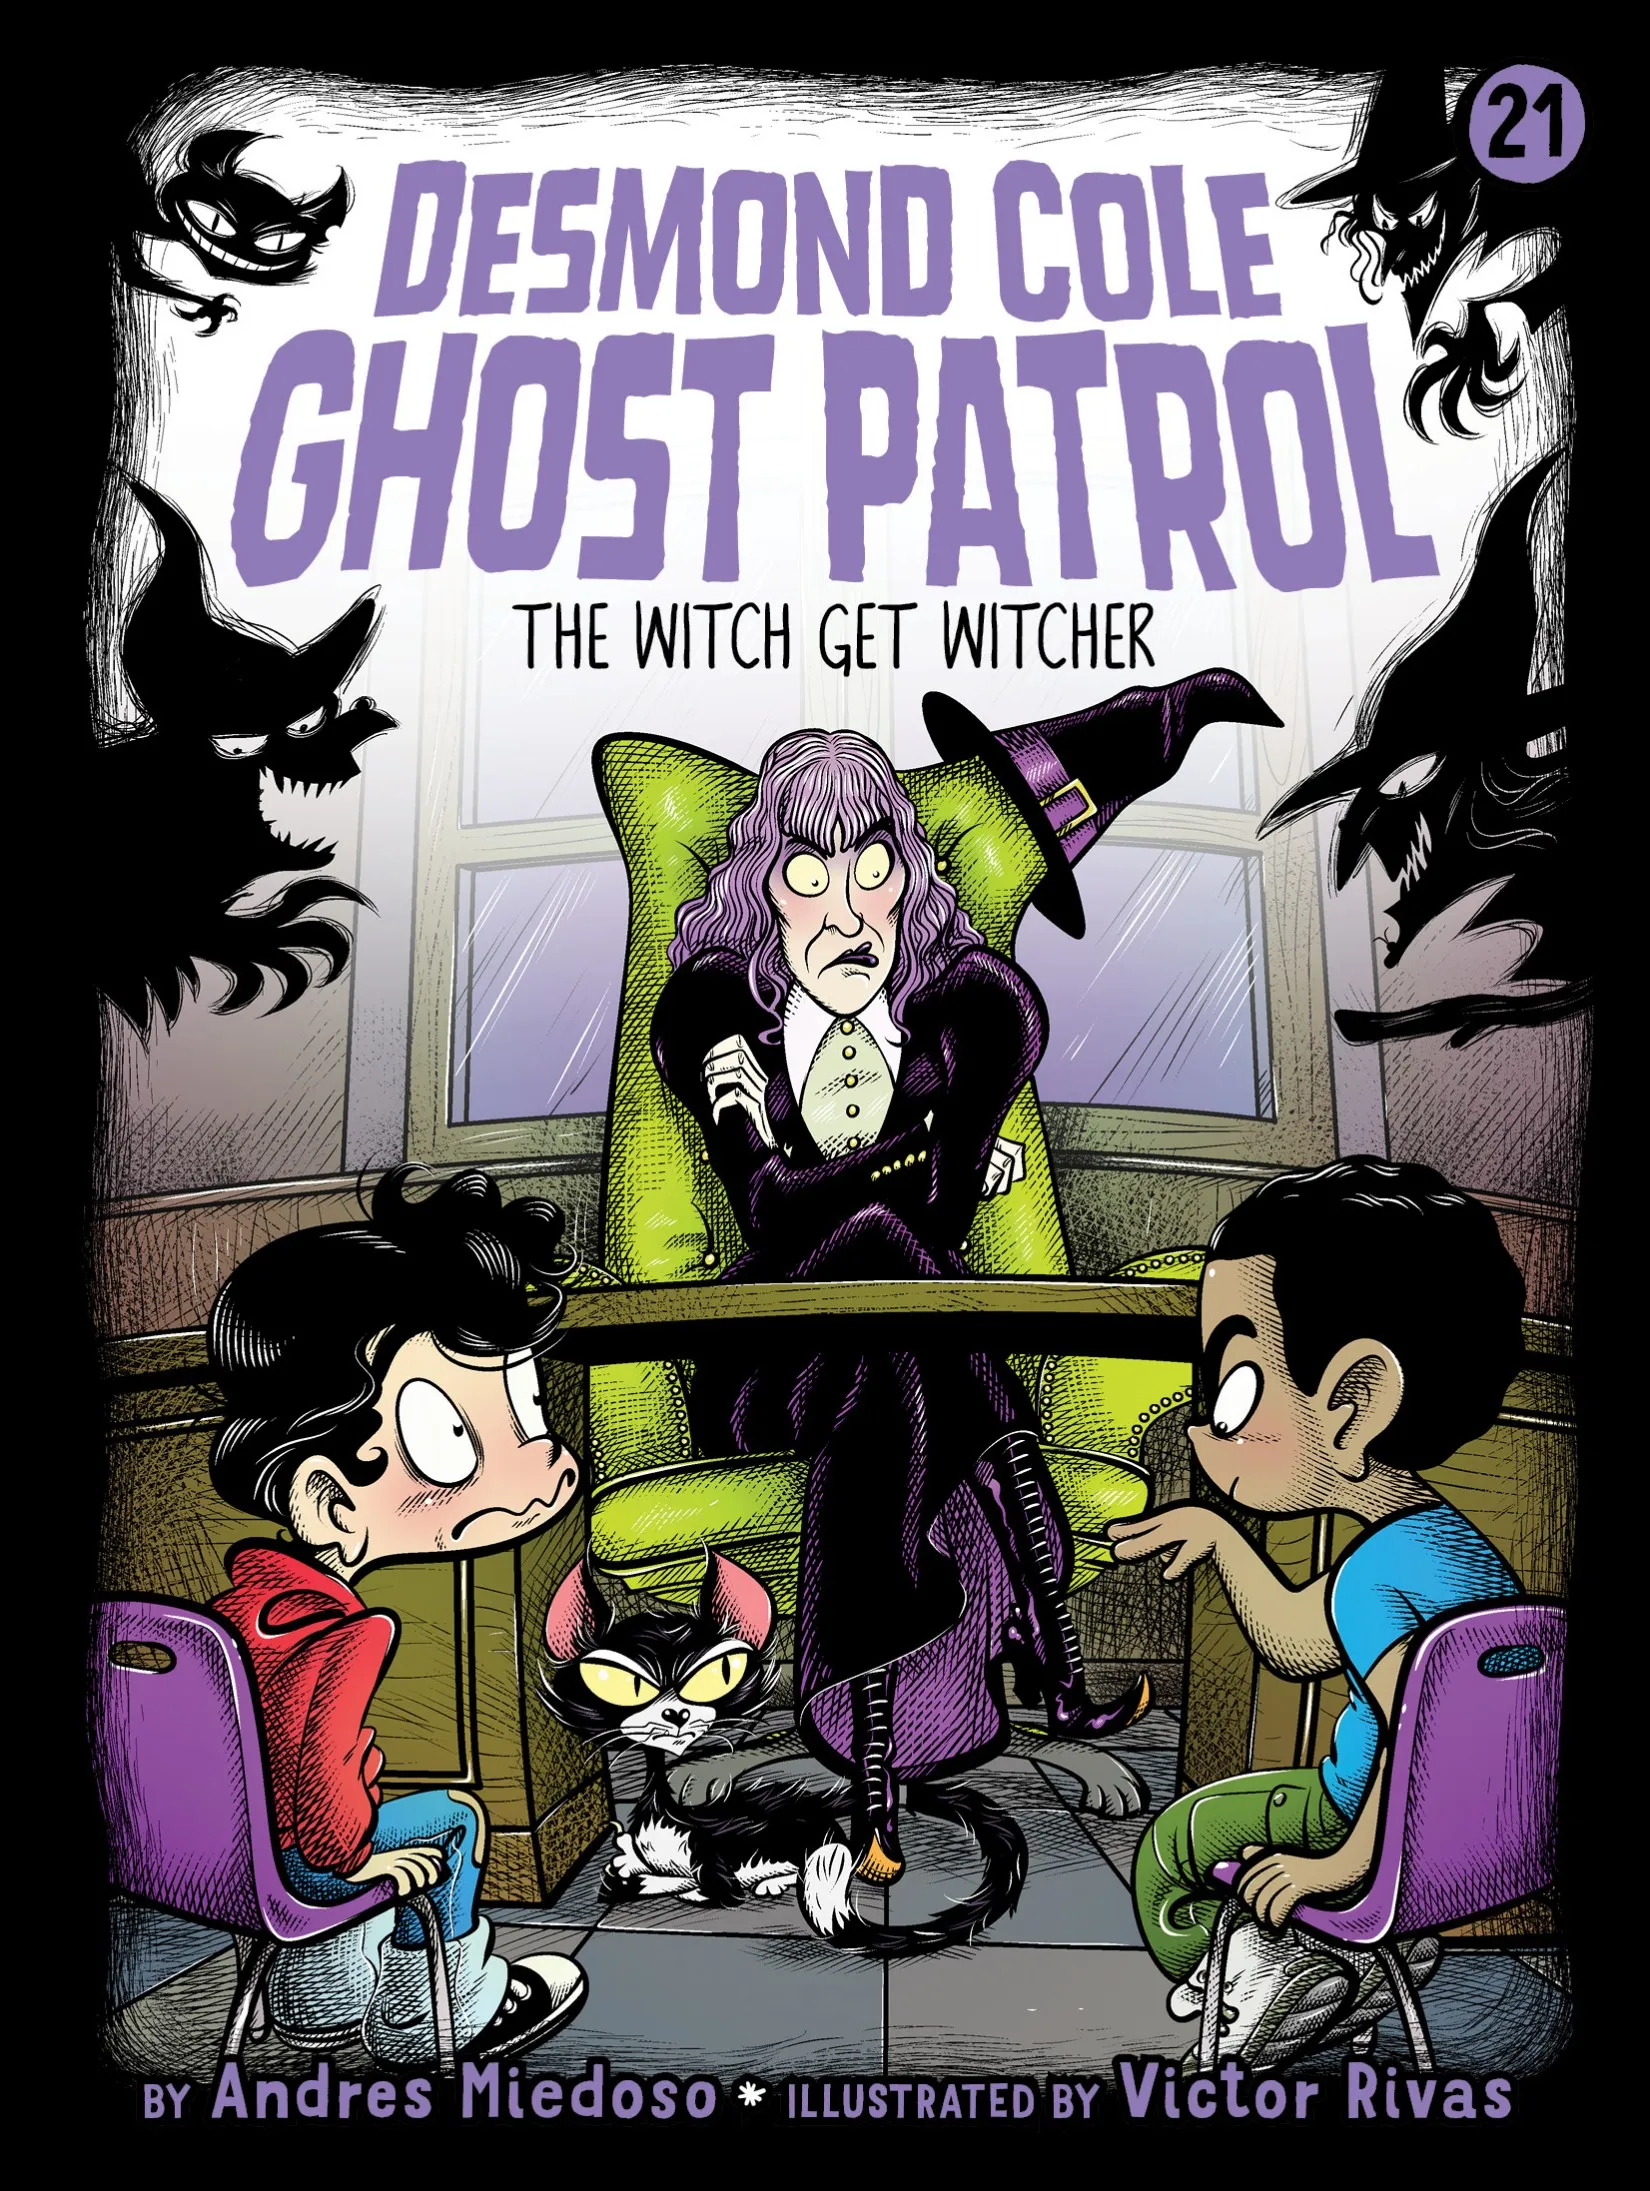 The Witch Get Witcher (Desmond Cole Ghost Patrol #21)